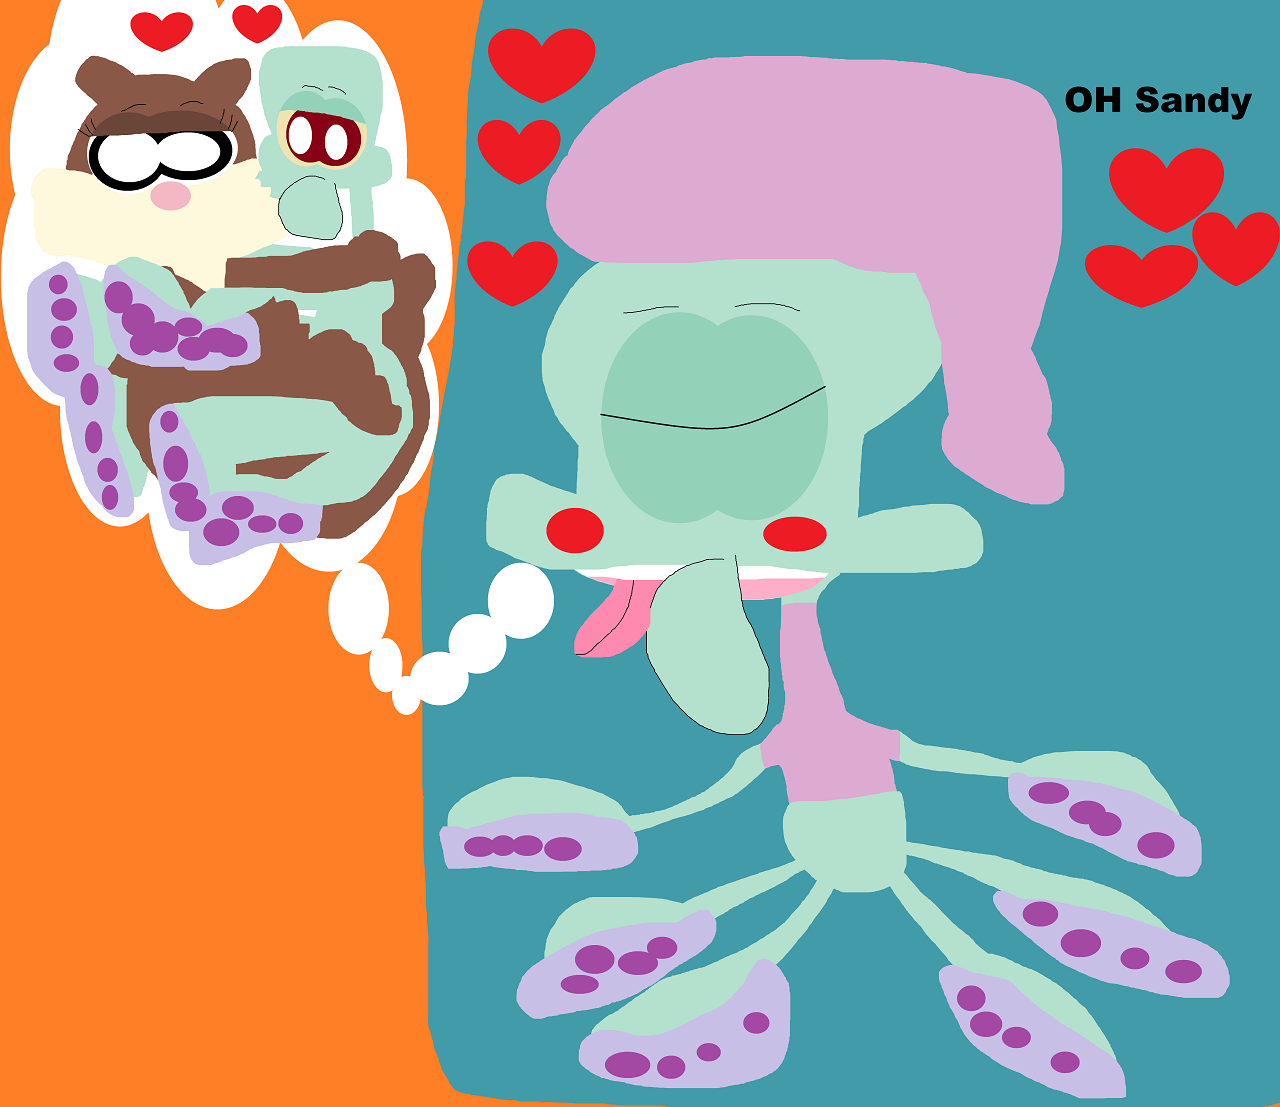 Random Squidward Dreaming About Making Love To Sandy by Falconlobo